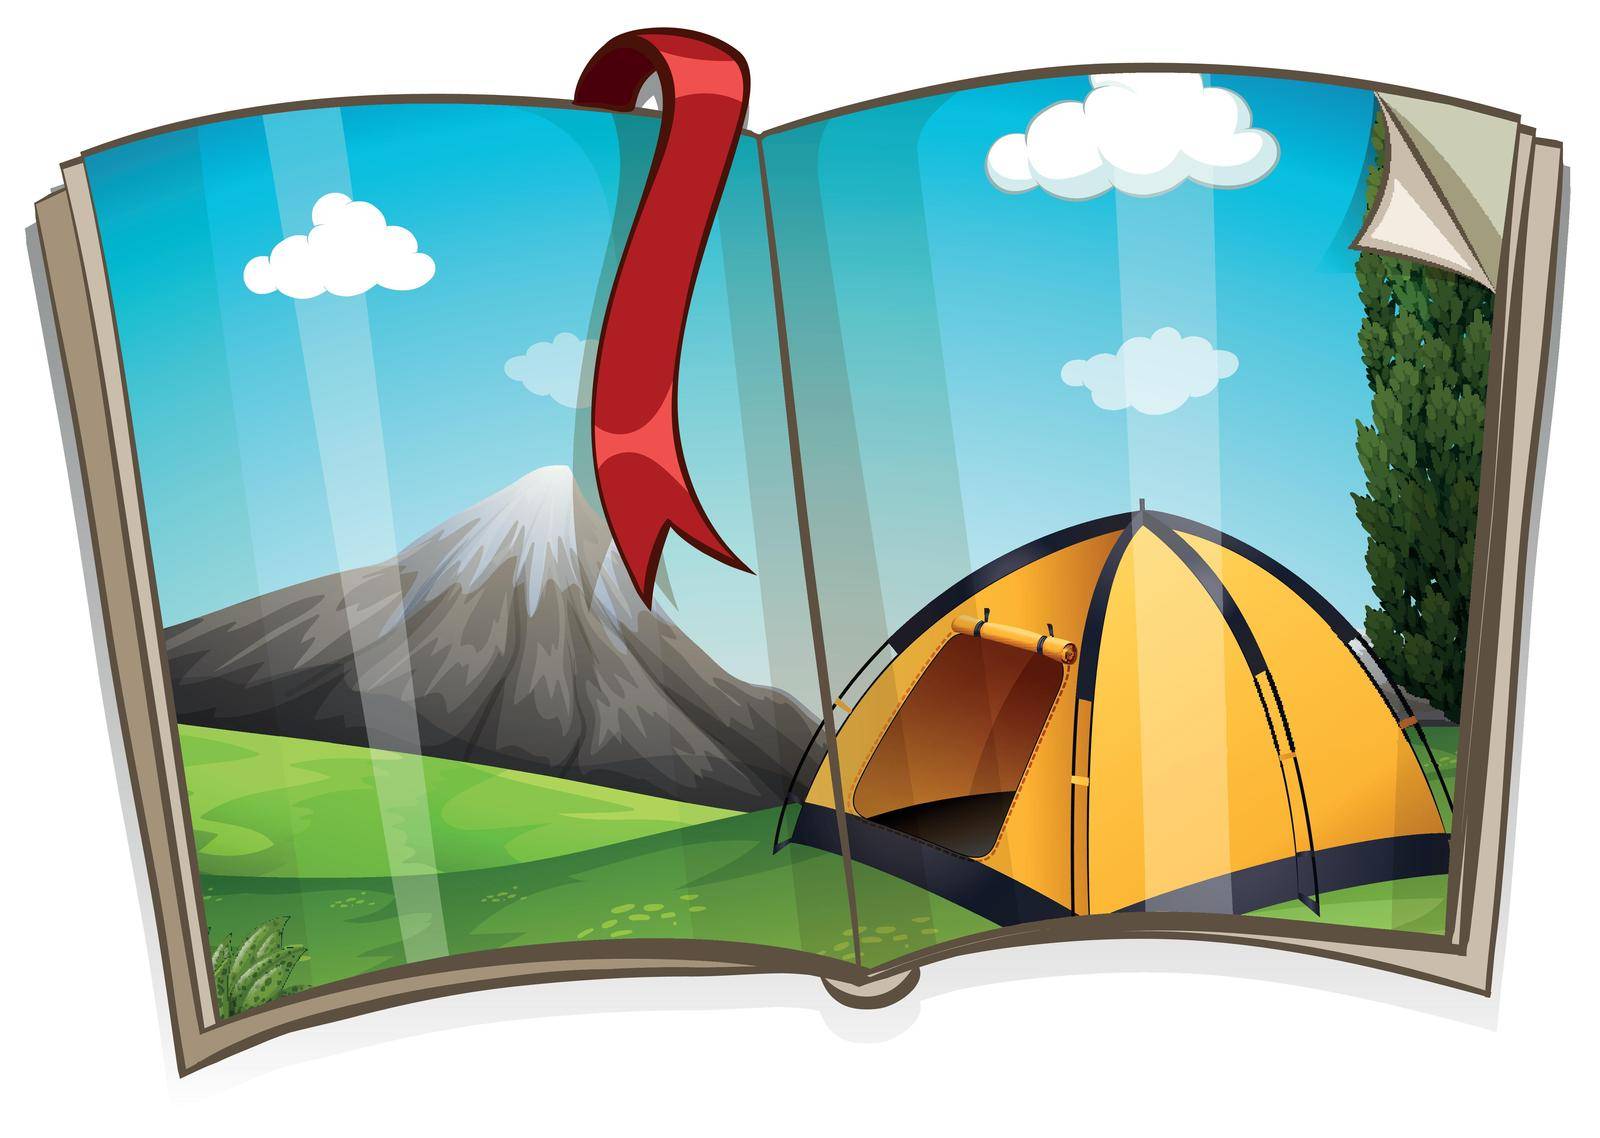 Camping site in the book illustration